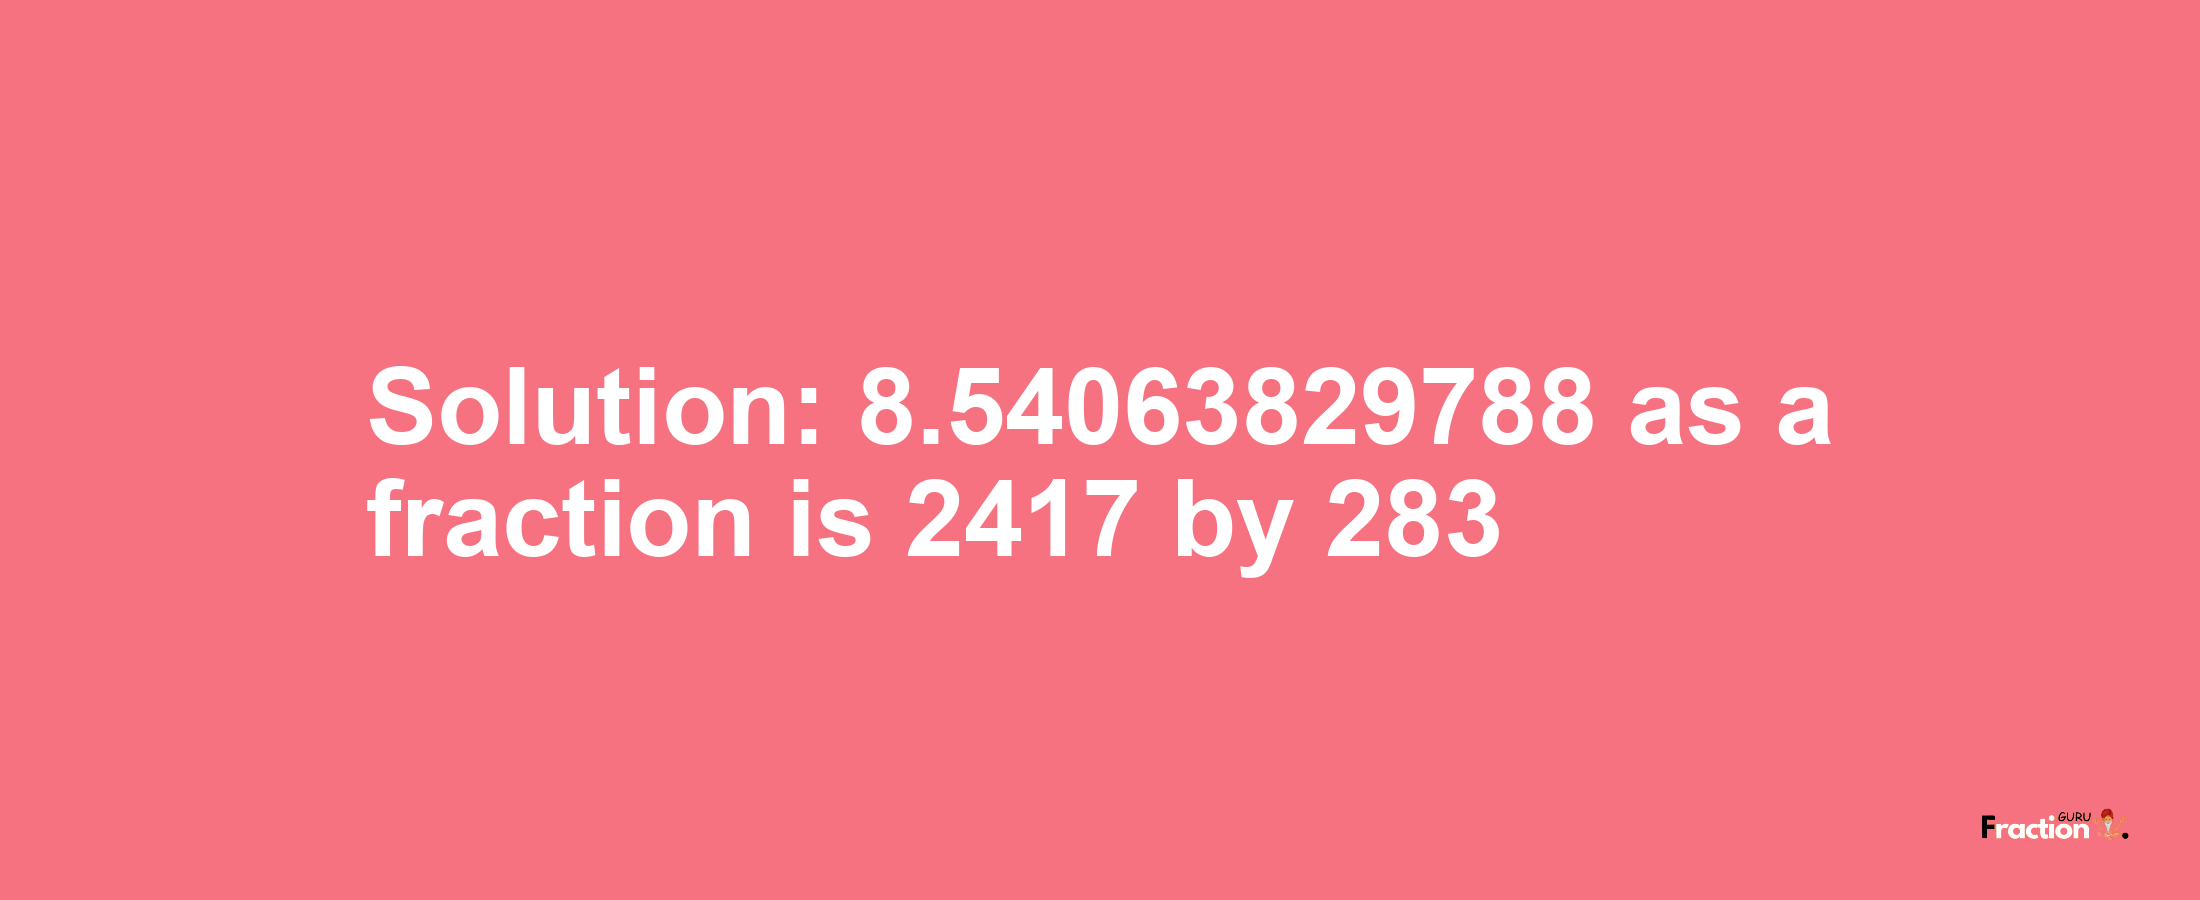 Solution:8.54063829788 as a fraction is 2417/283